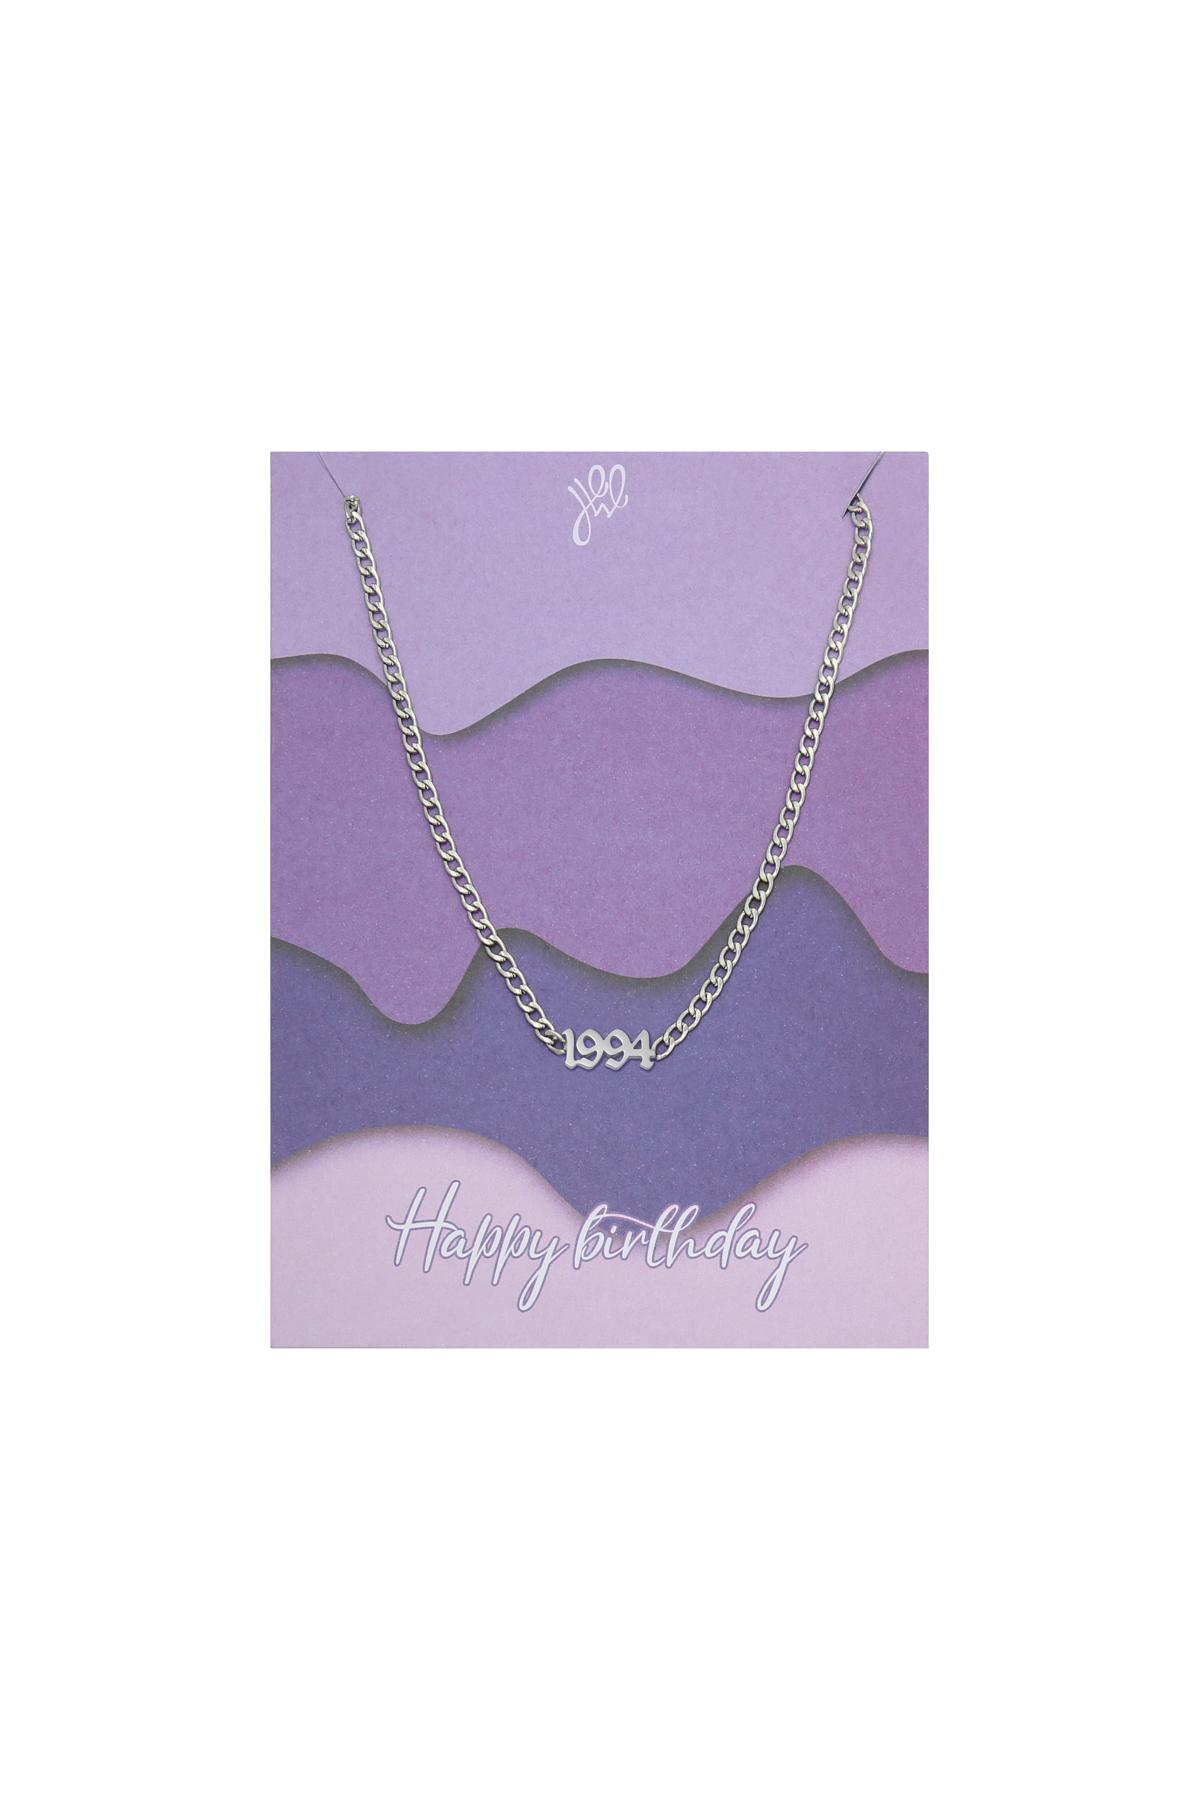 Necklace Happy Birthday Years - 1994 Silver Stainless Steel 